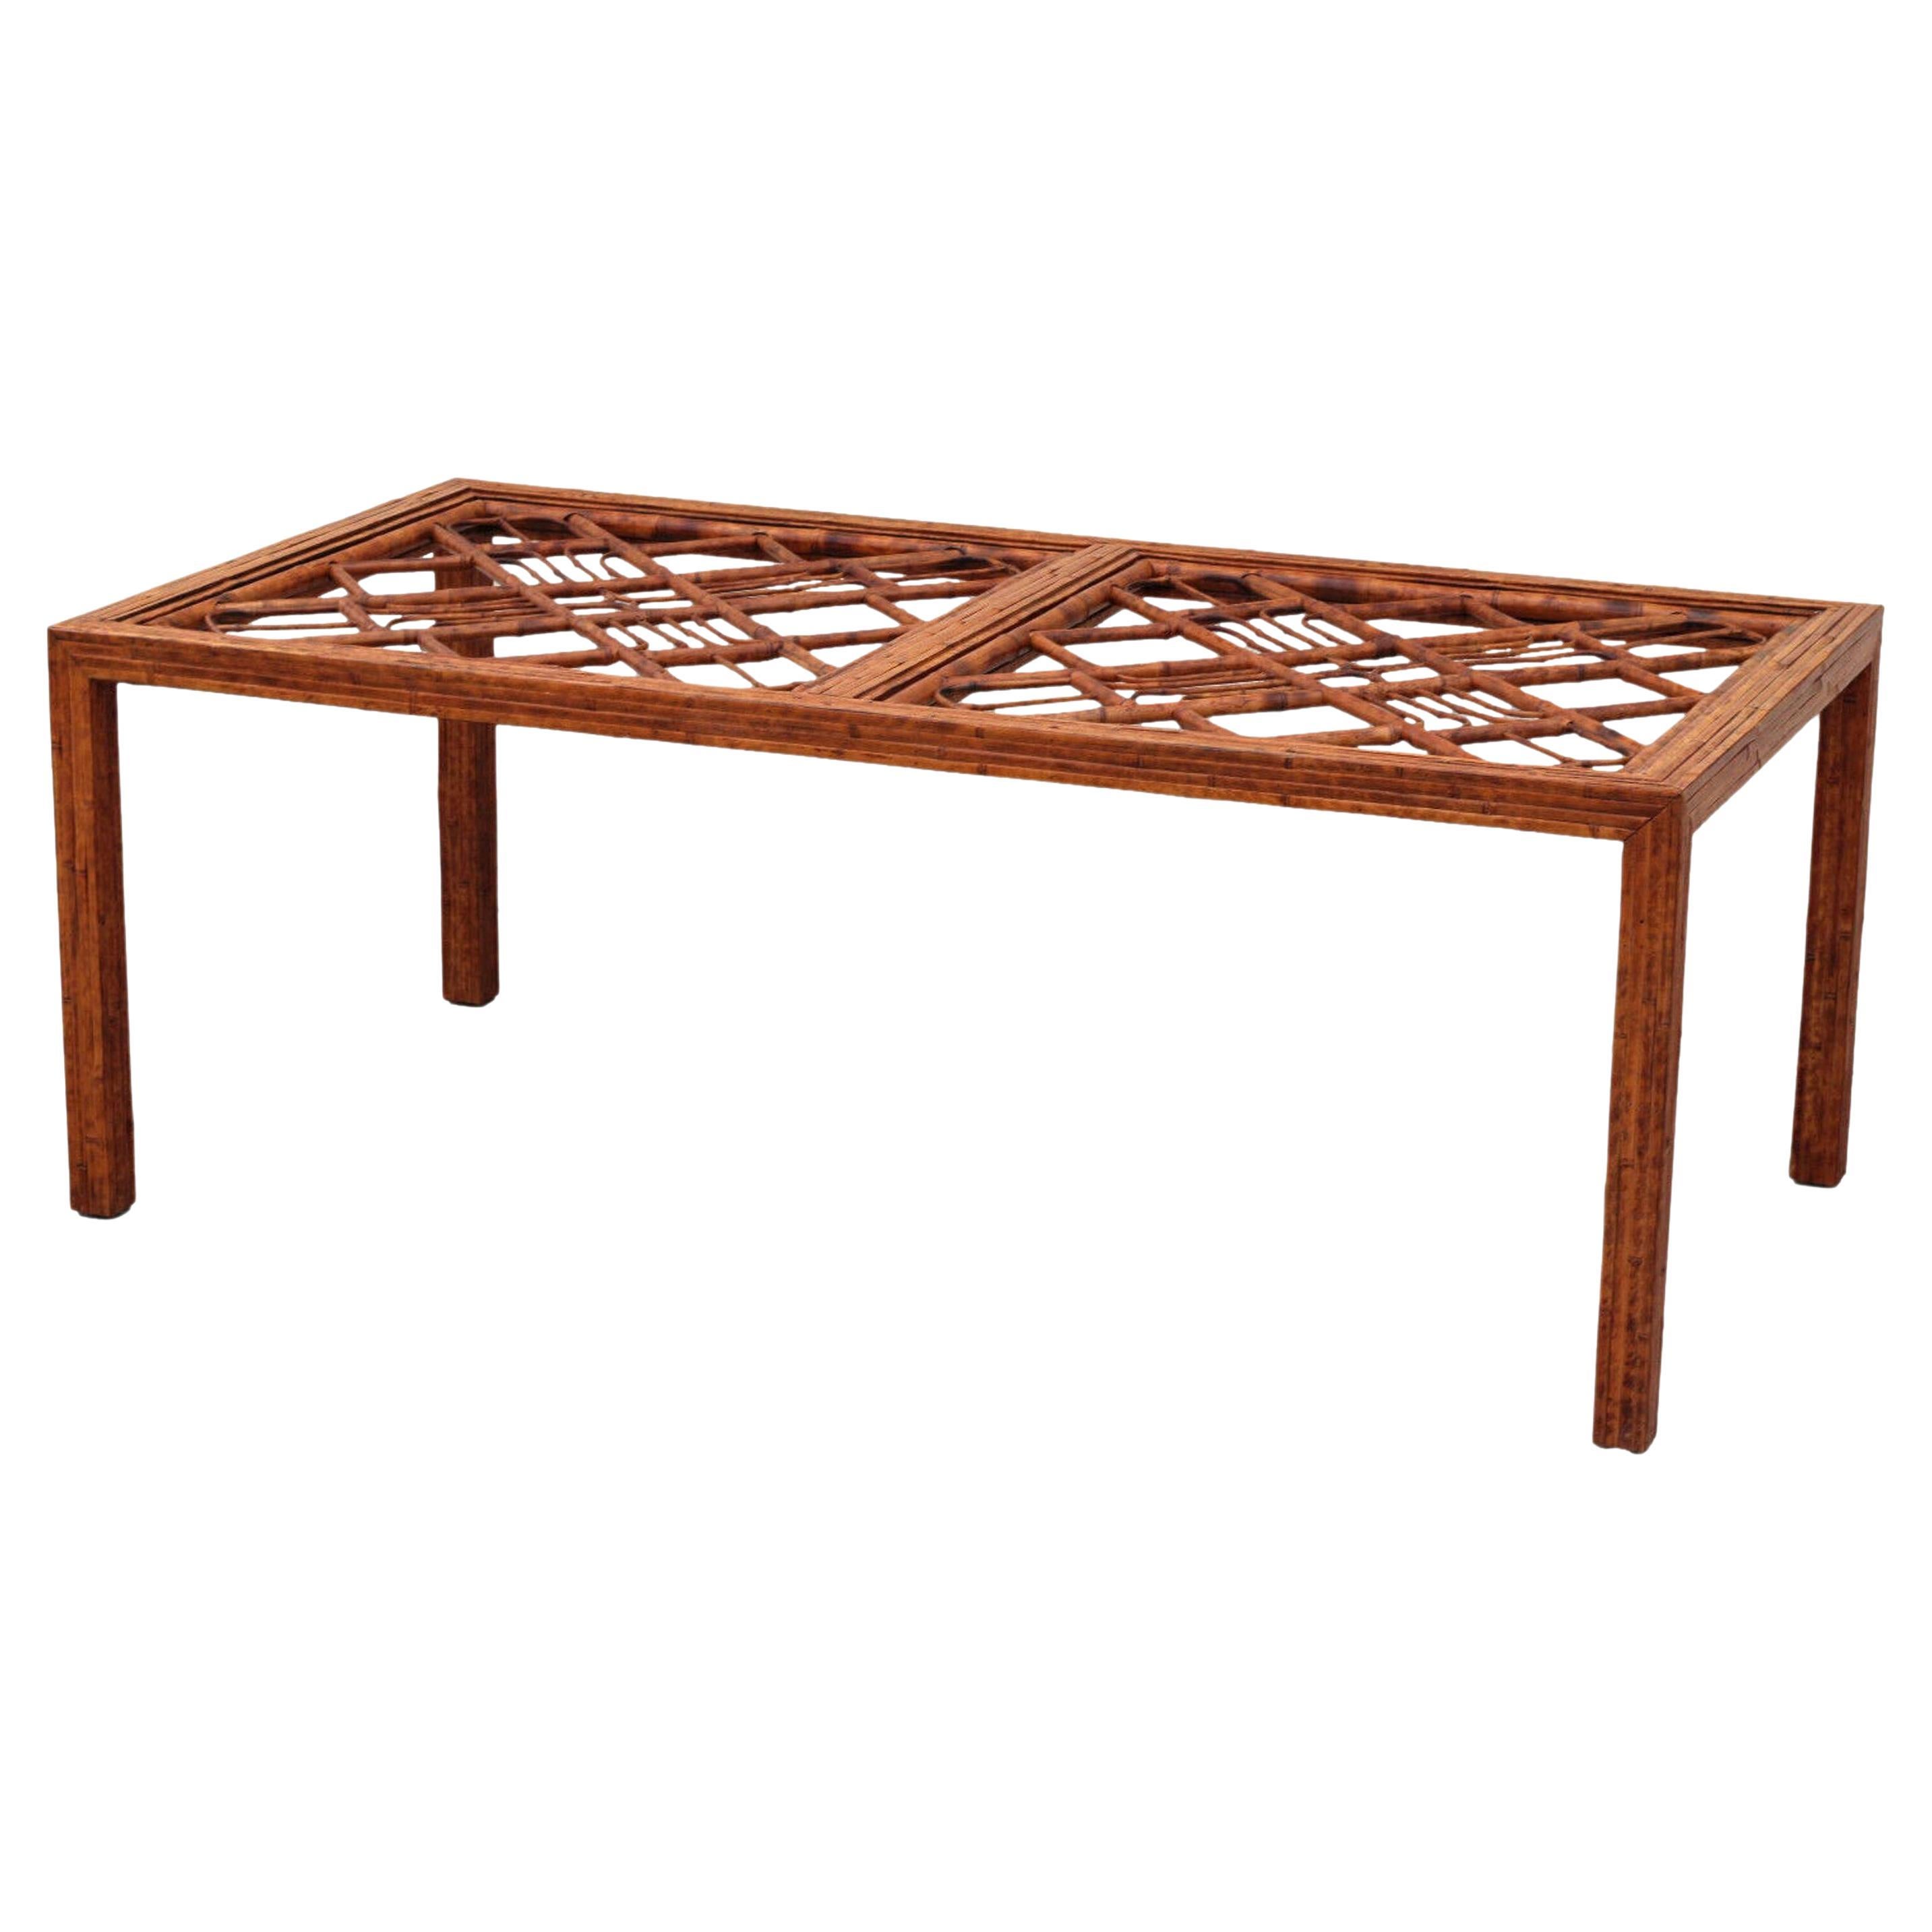 Vintage Brighton Style Tortoiseshell Bamboo Dining Table For Sale